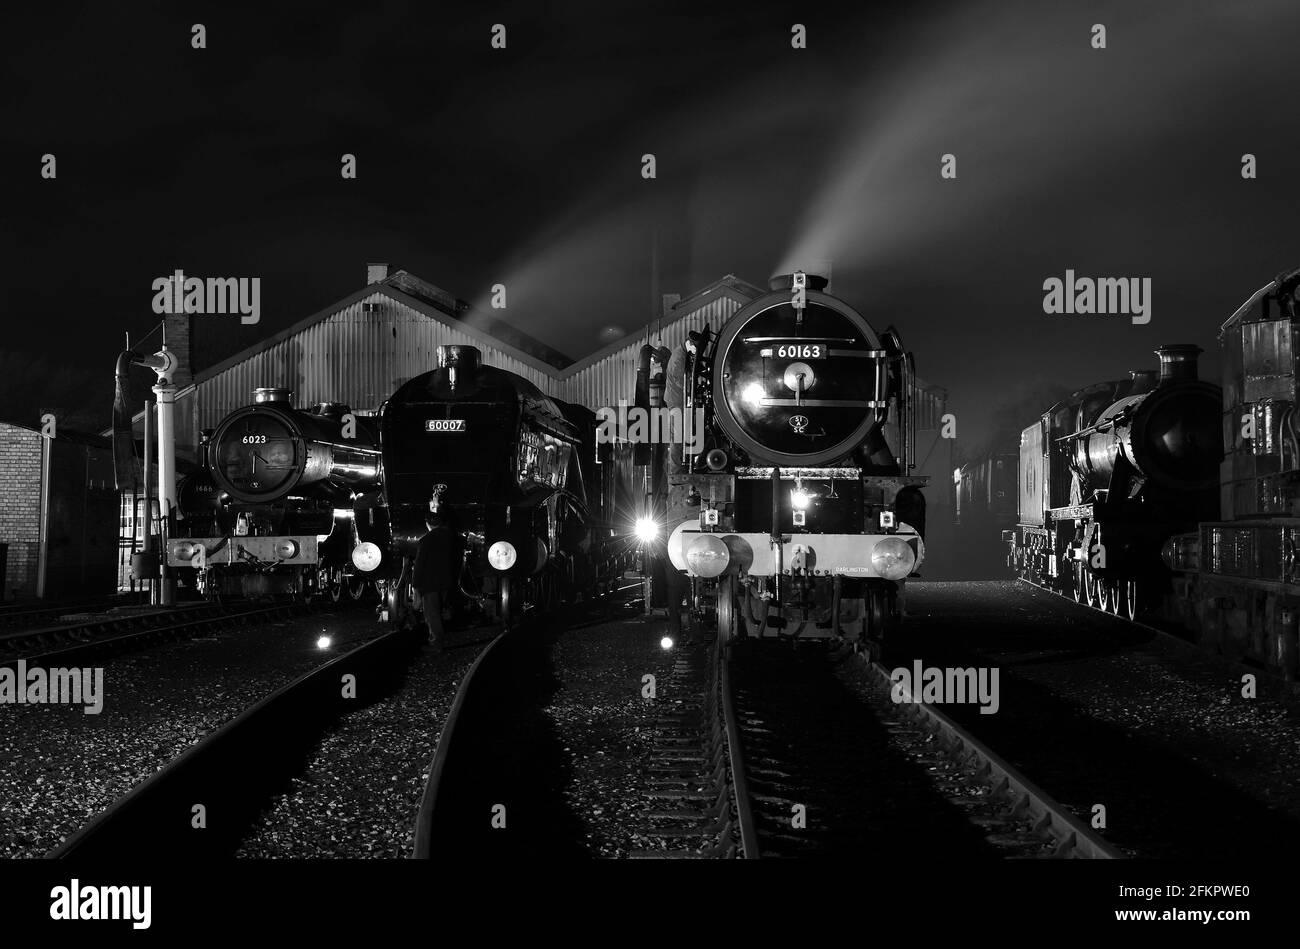 Left to right outside the shed are '1466', 'King Edward II', 'Sir Nigel Gresley', 'Tornado' and 'Burton Agnes Hall' Stock Photo